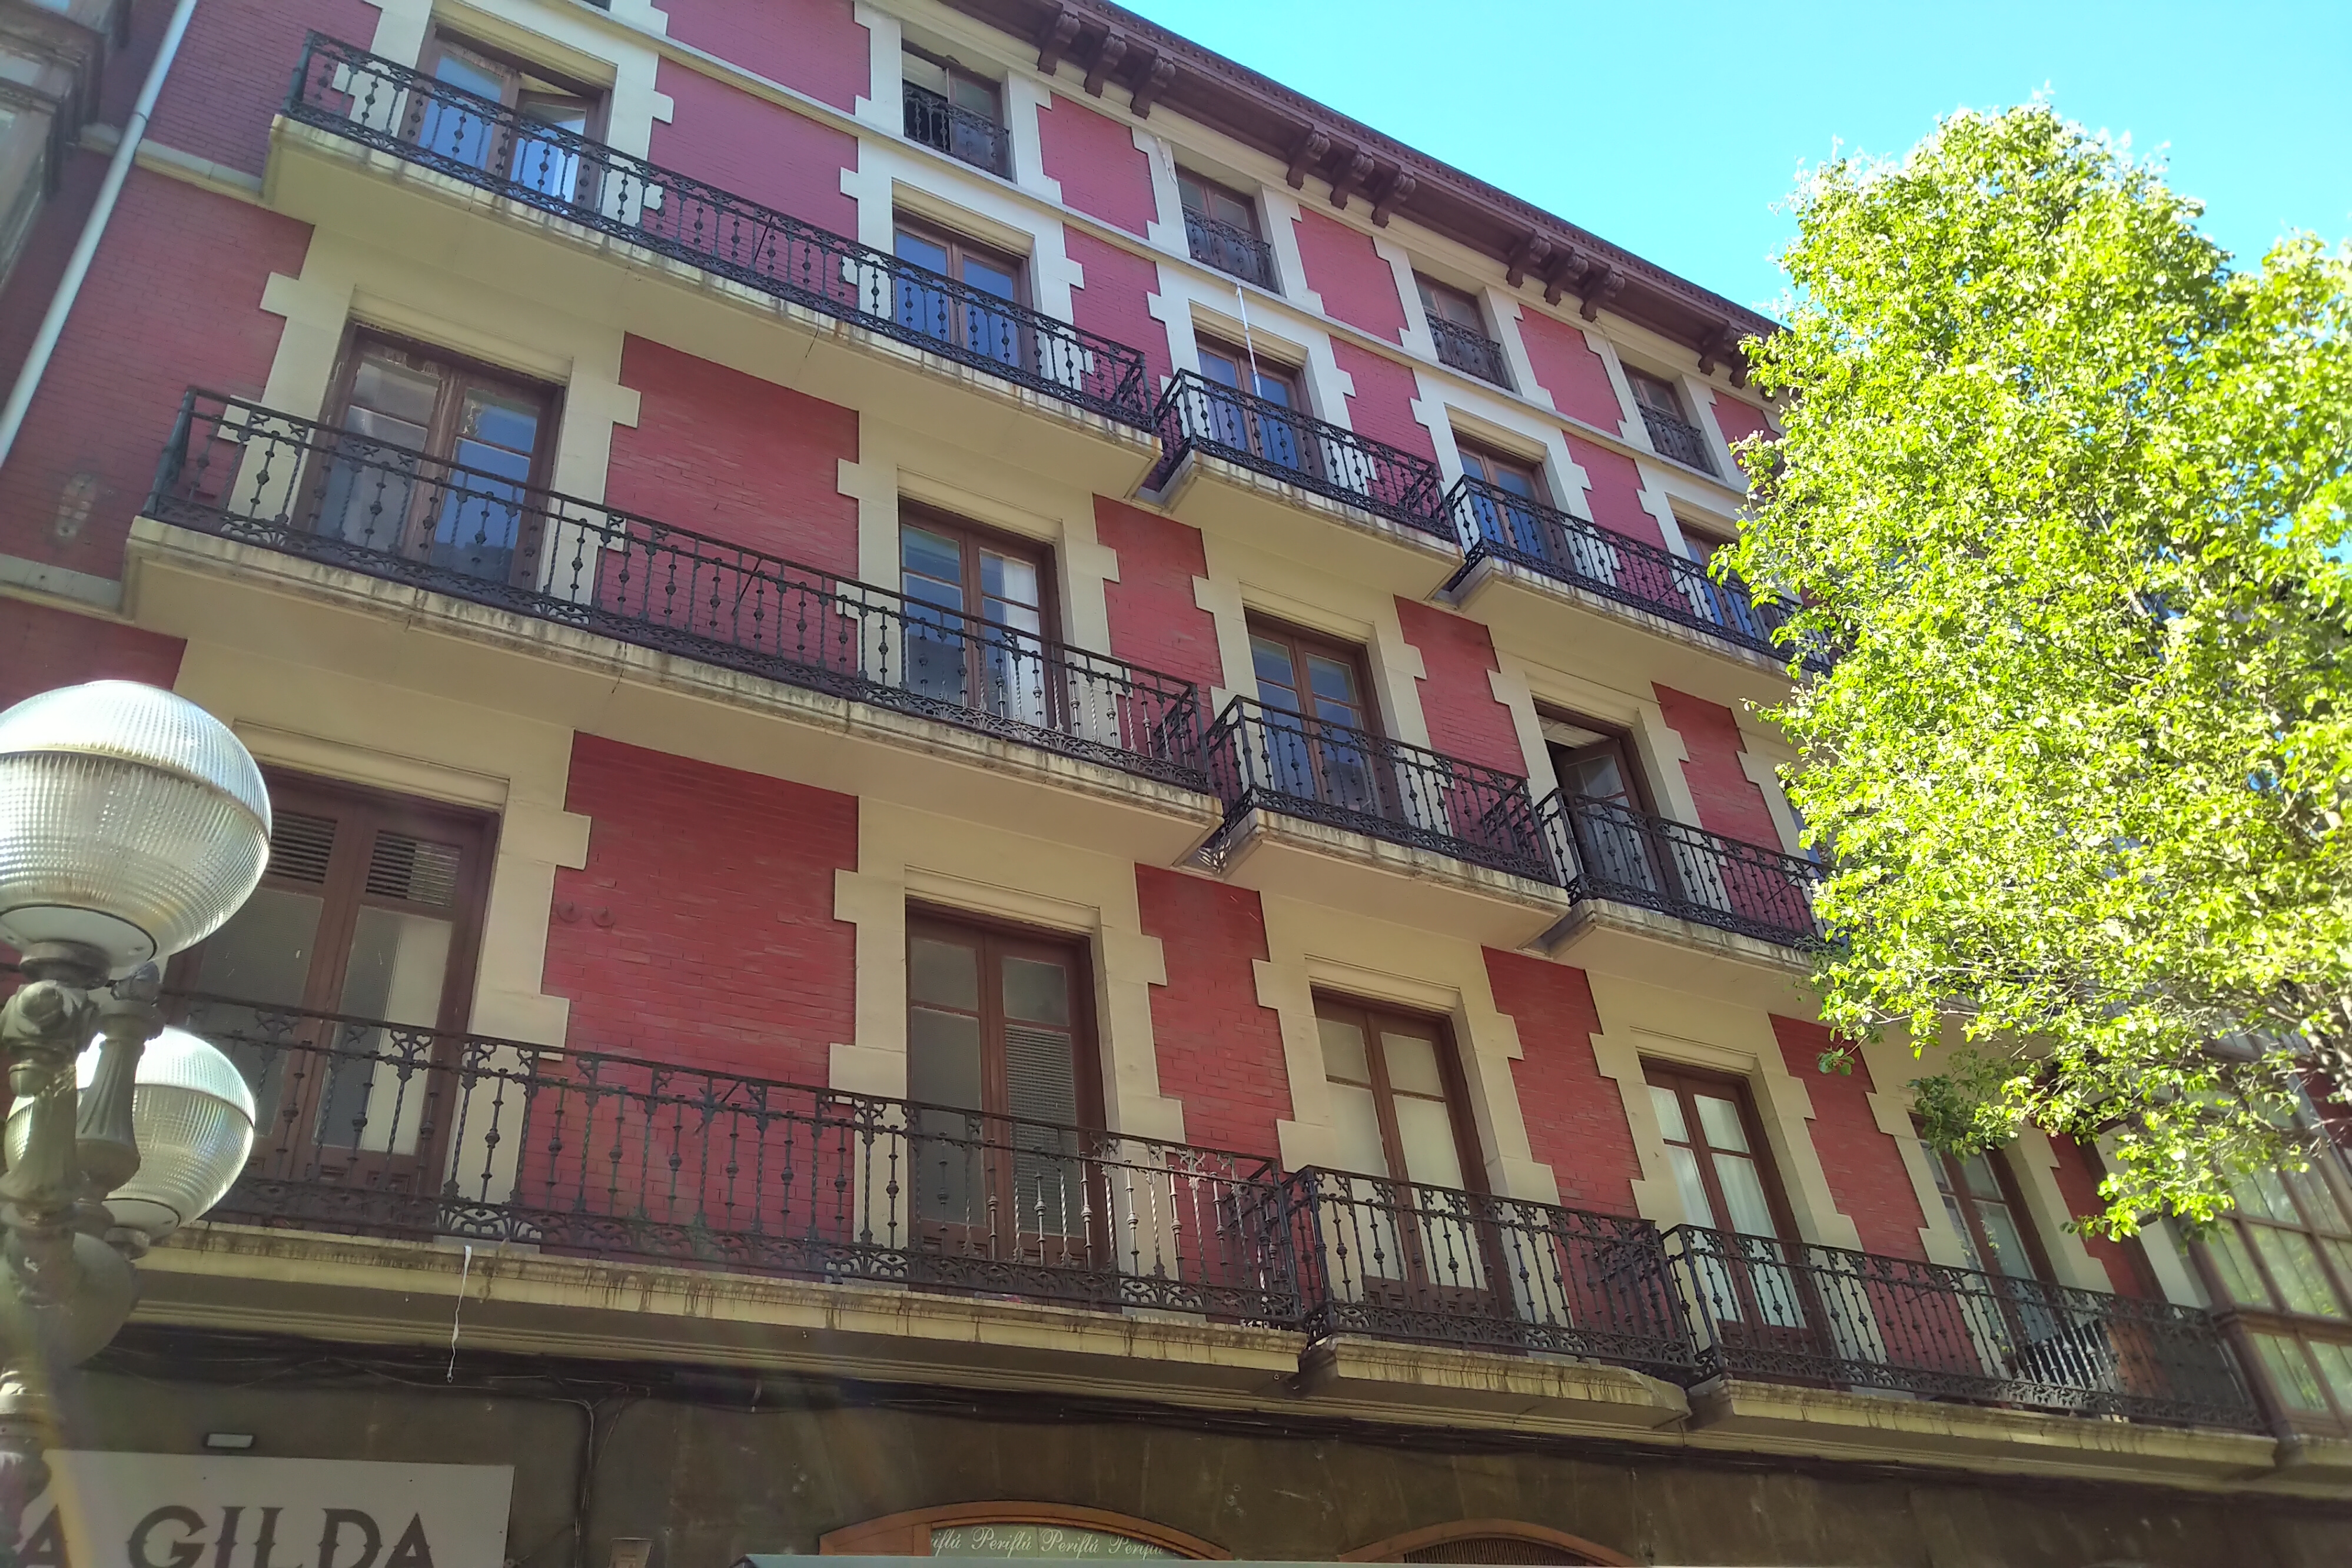 ALL IRON RE I Socimi acquires a property in Bilbao for €5.1M